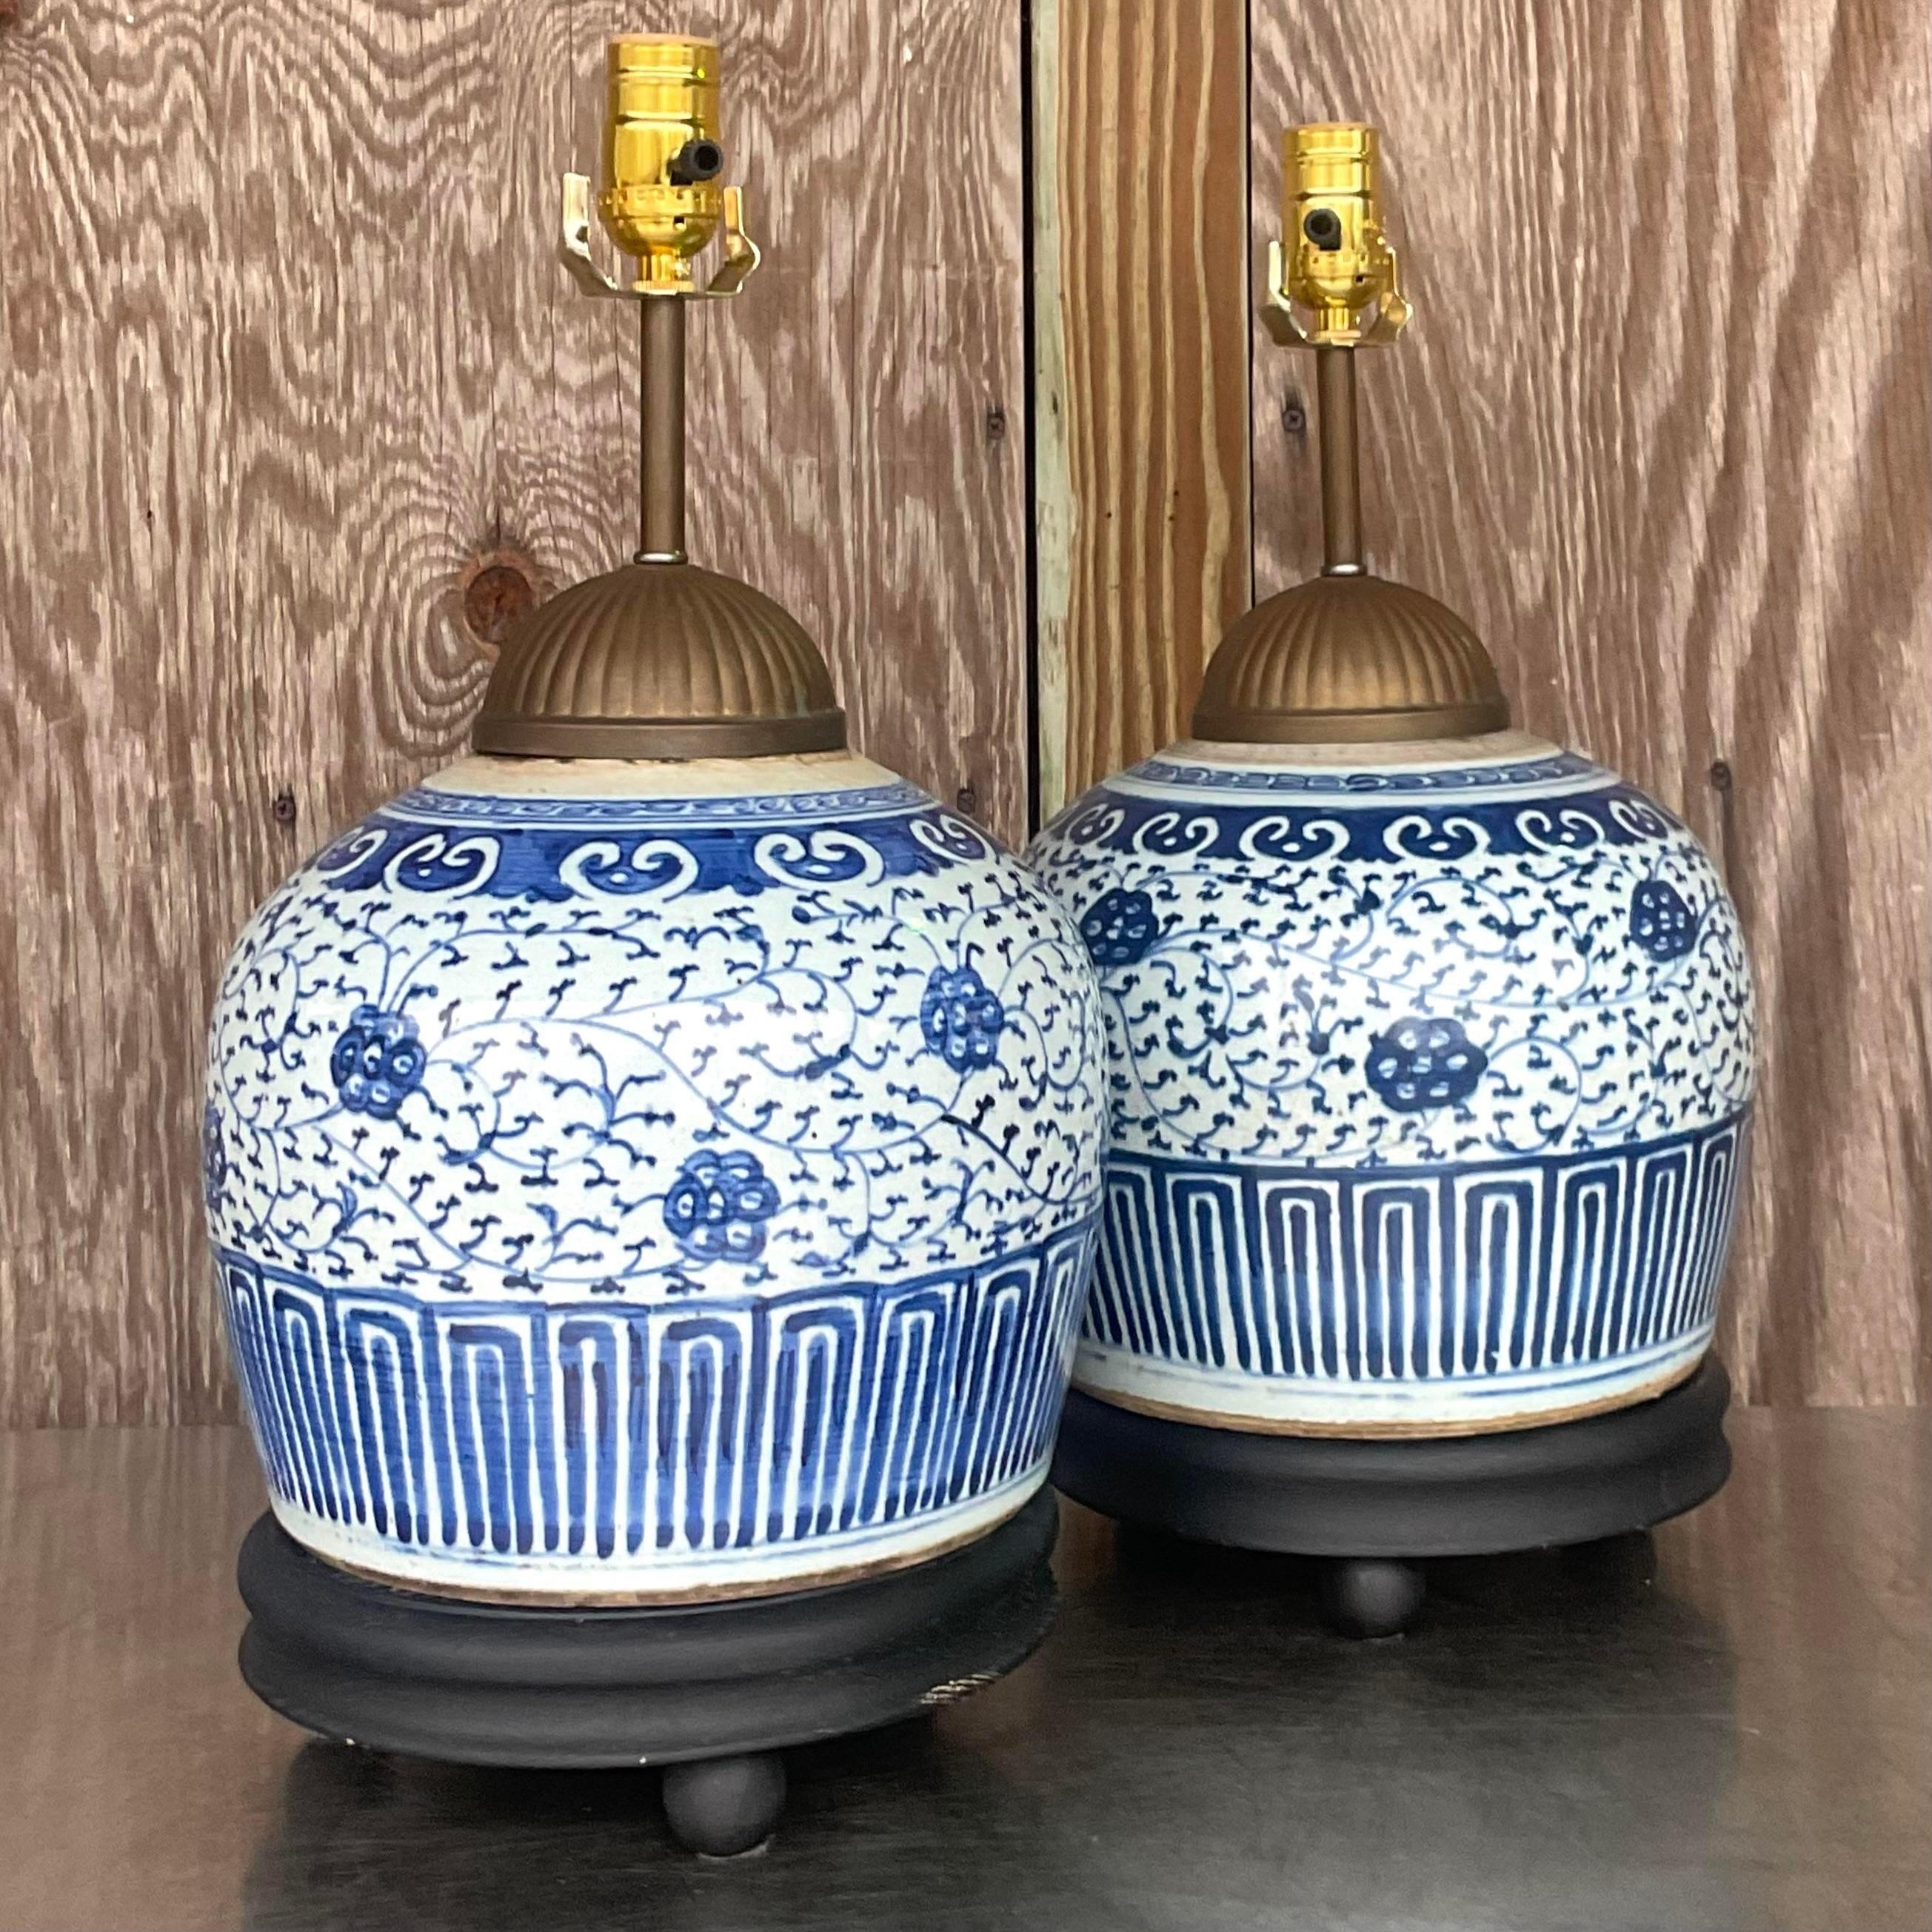 20th Century Vintage Asian Blue and White Ceramic Lamps - a Pair For Sale